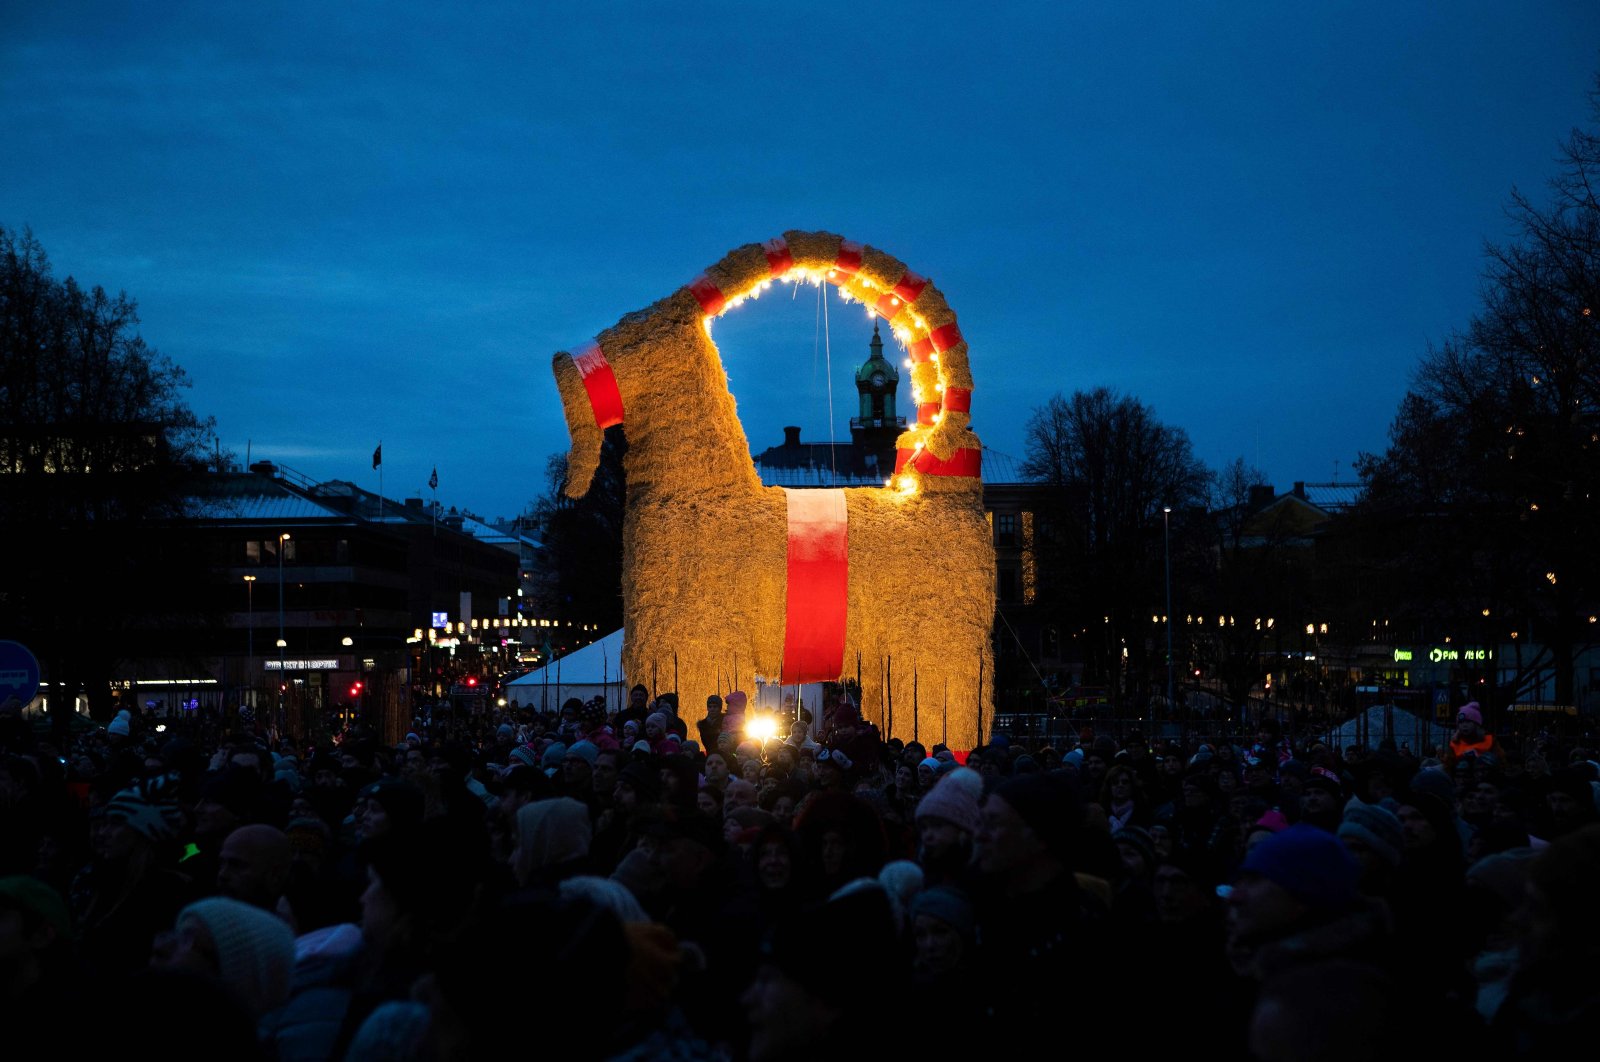 People gather at the inauguration of the traditional Christmas goat in Gavle, Sweden, Nov. 28, 2021. (AFP Photo)